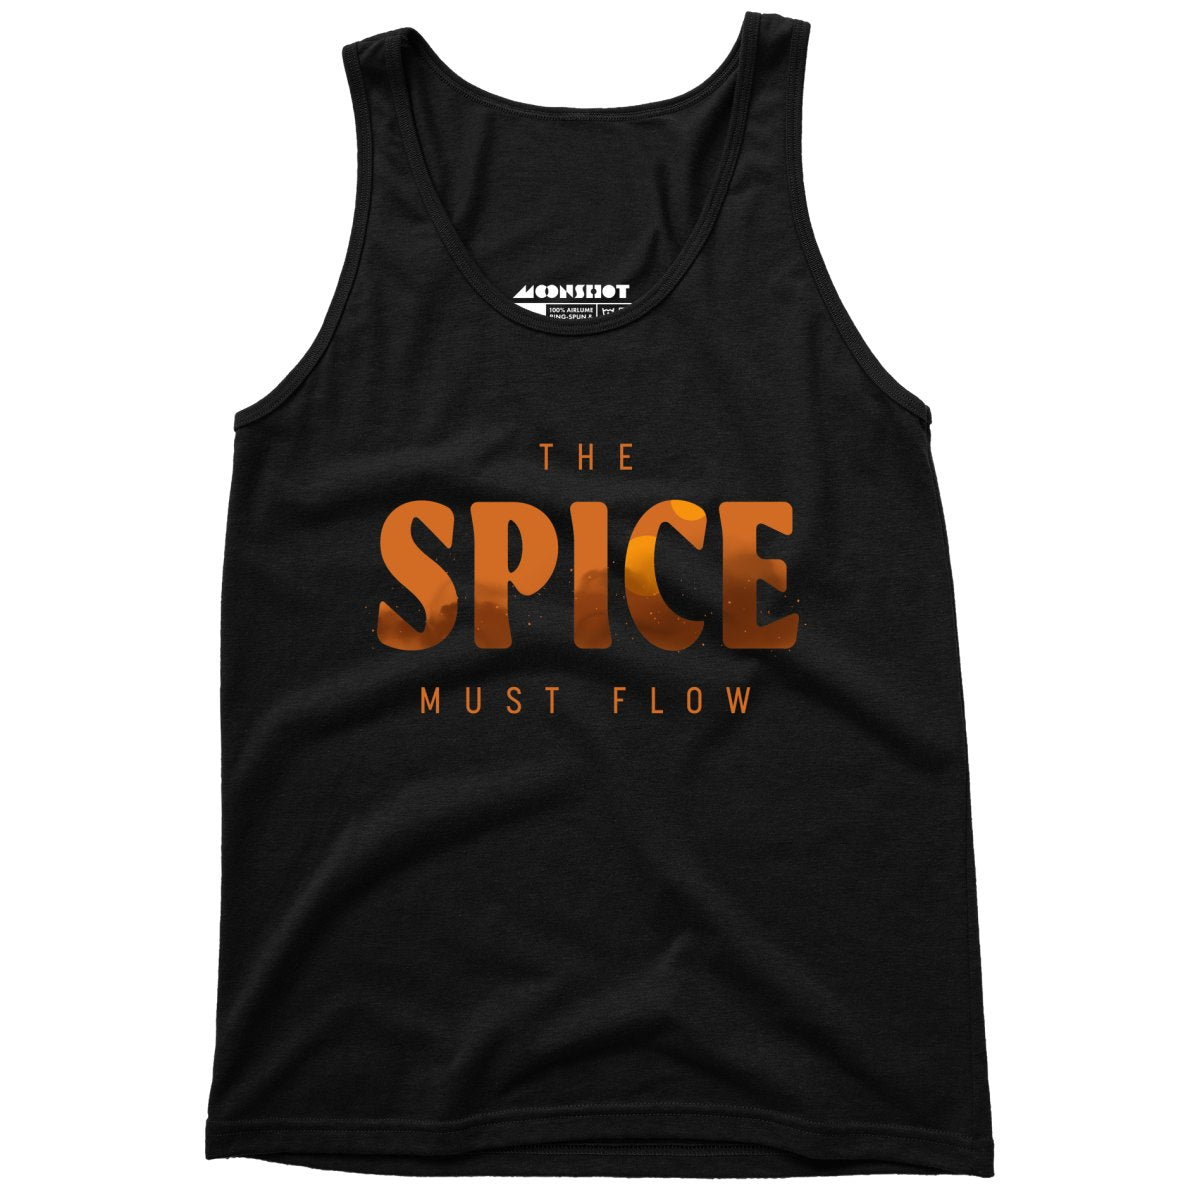 The Spice Must Flow - Unisex Tank Top